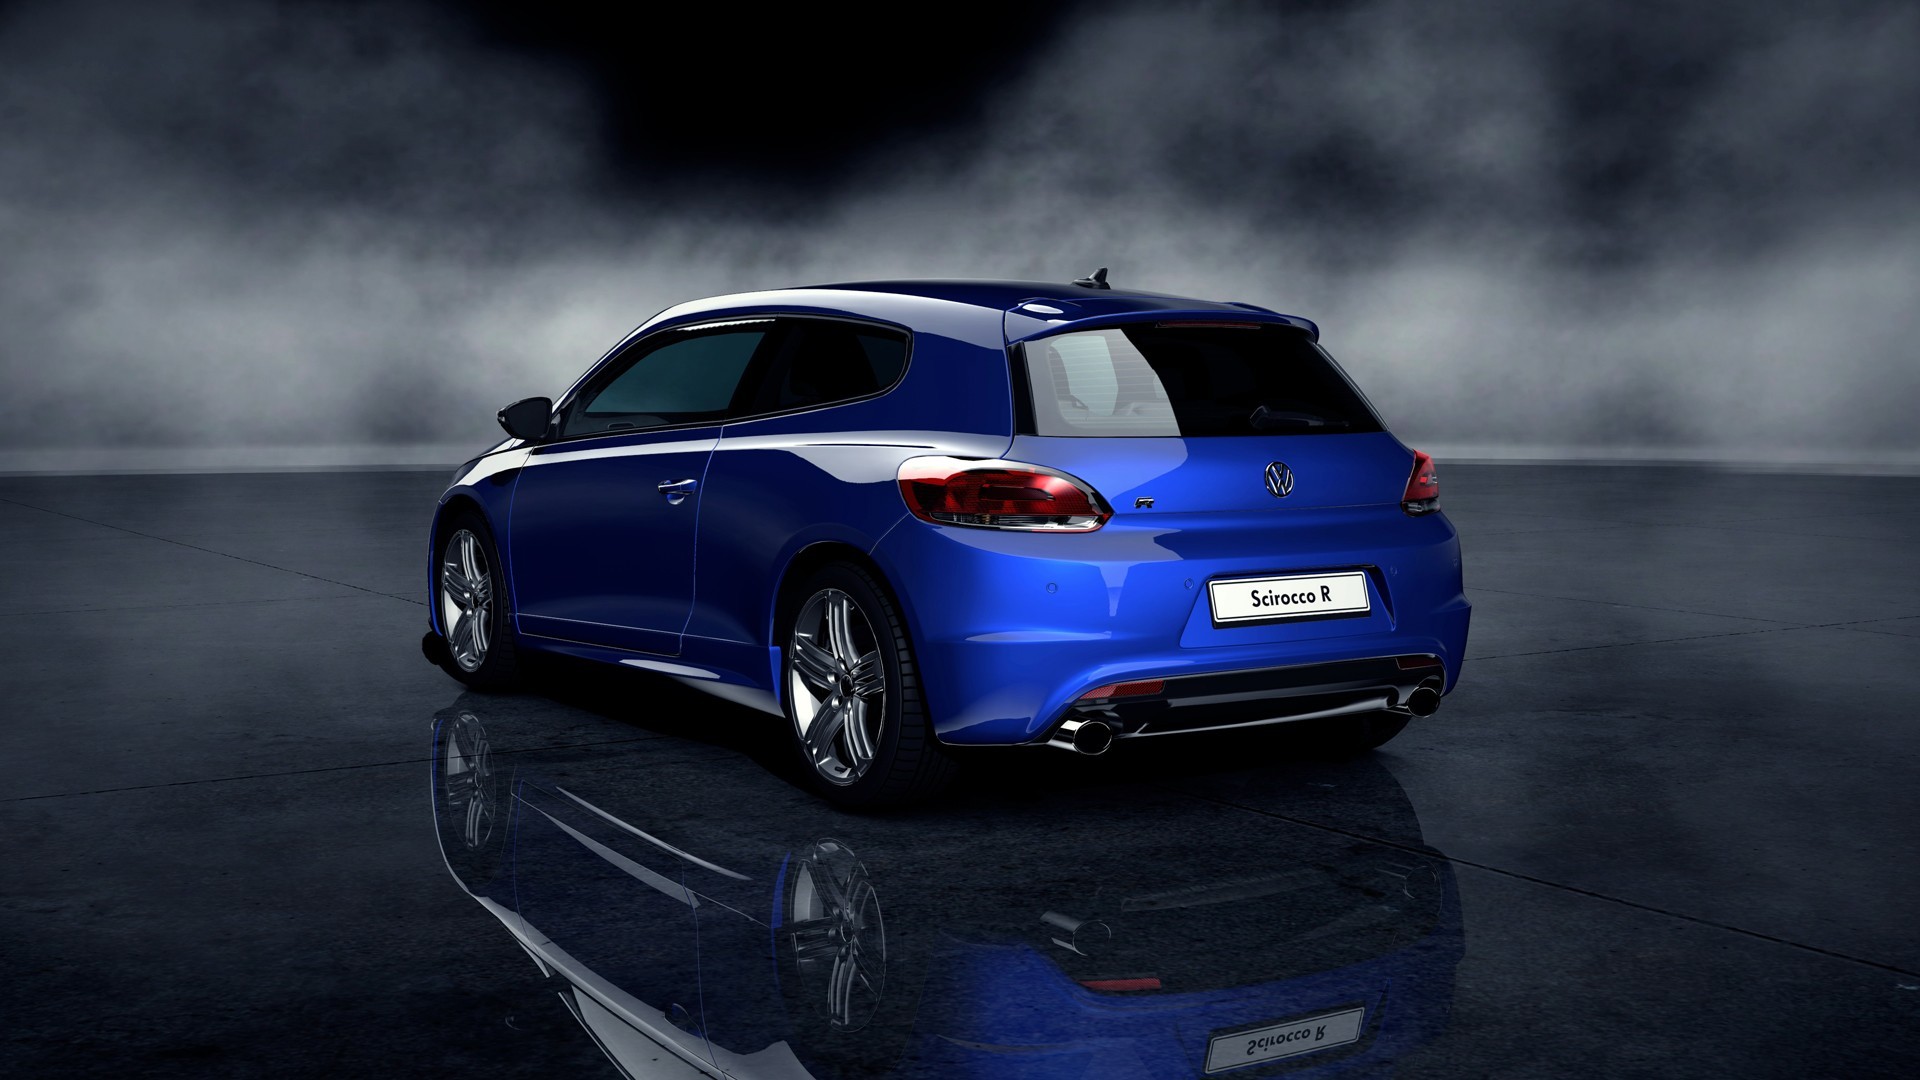 Wallpapers car blue cars vehicle on the desktop